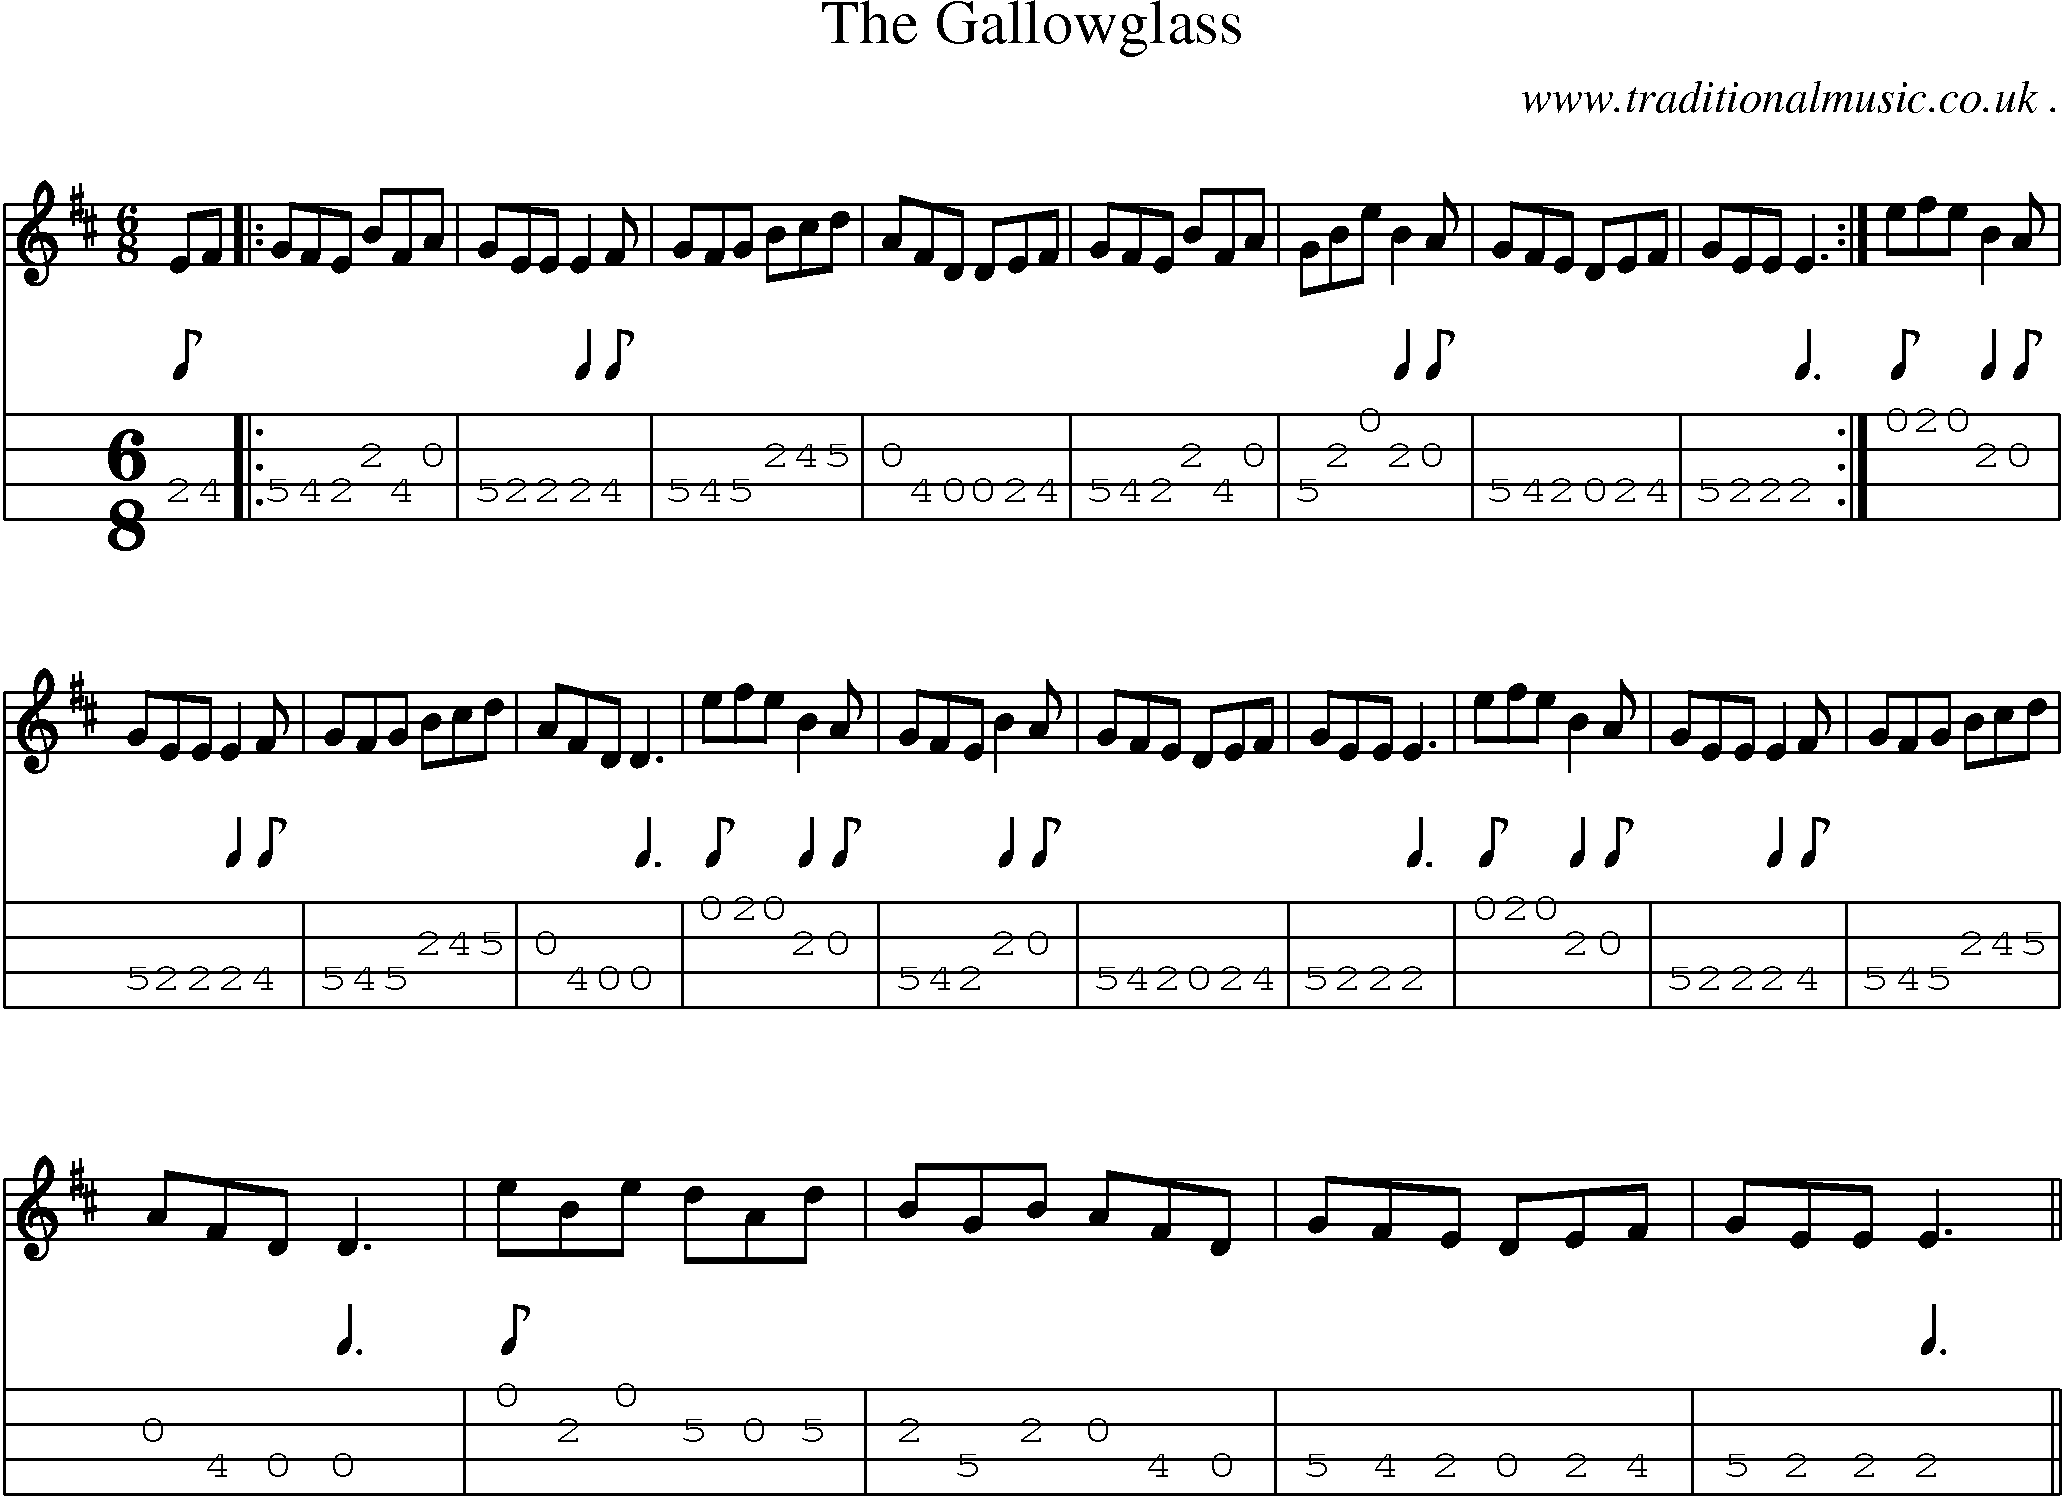 Sheet-Music and Mandolin Tabs for The Gallowglass